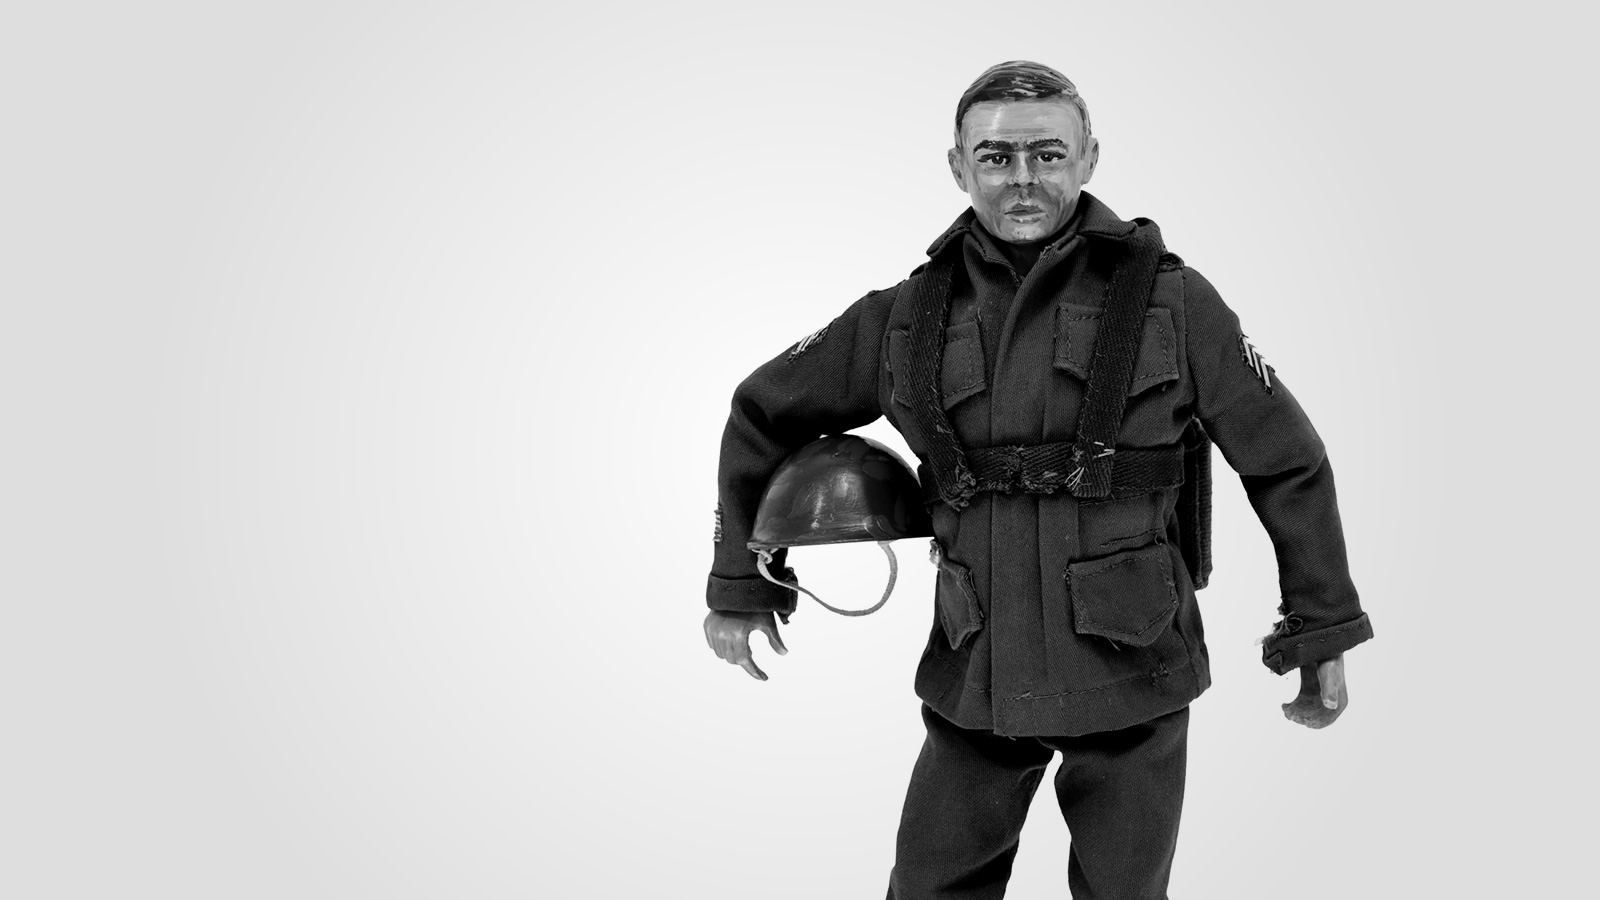 A detailed doll of a paratrooper standing at ease, with his helmet tucked under one arm